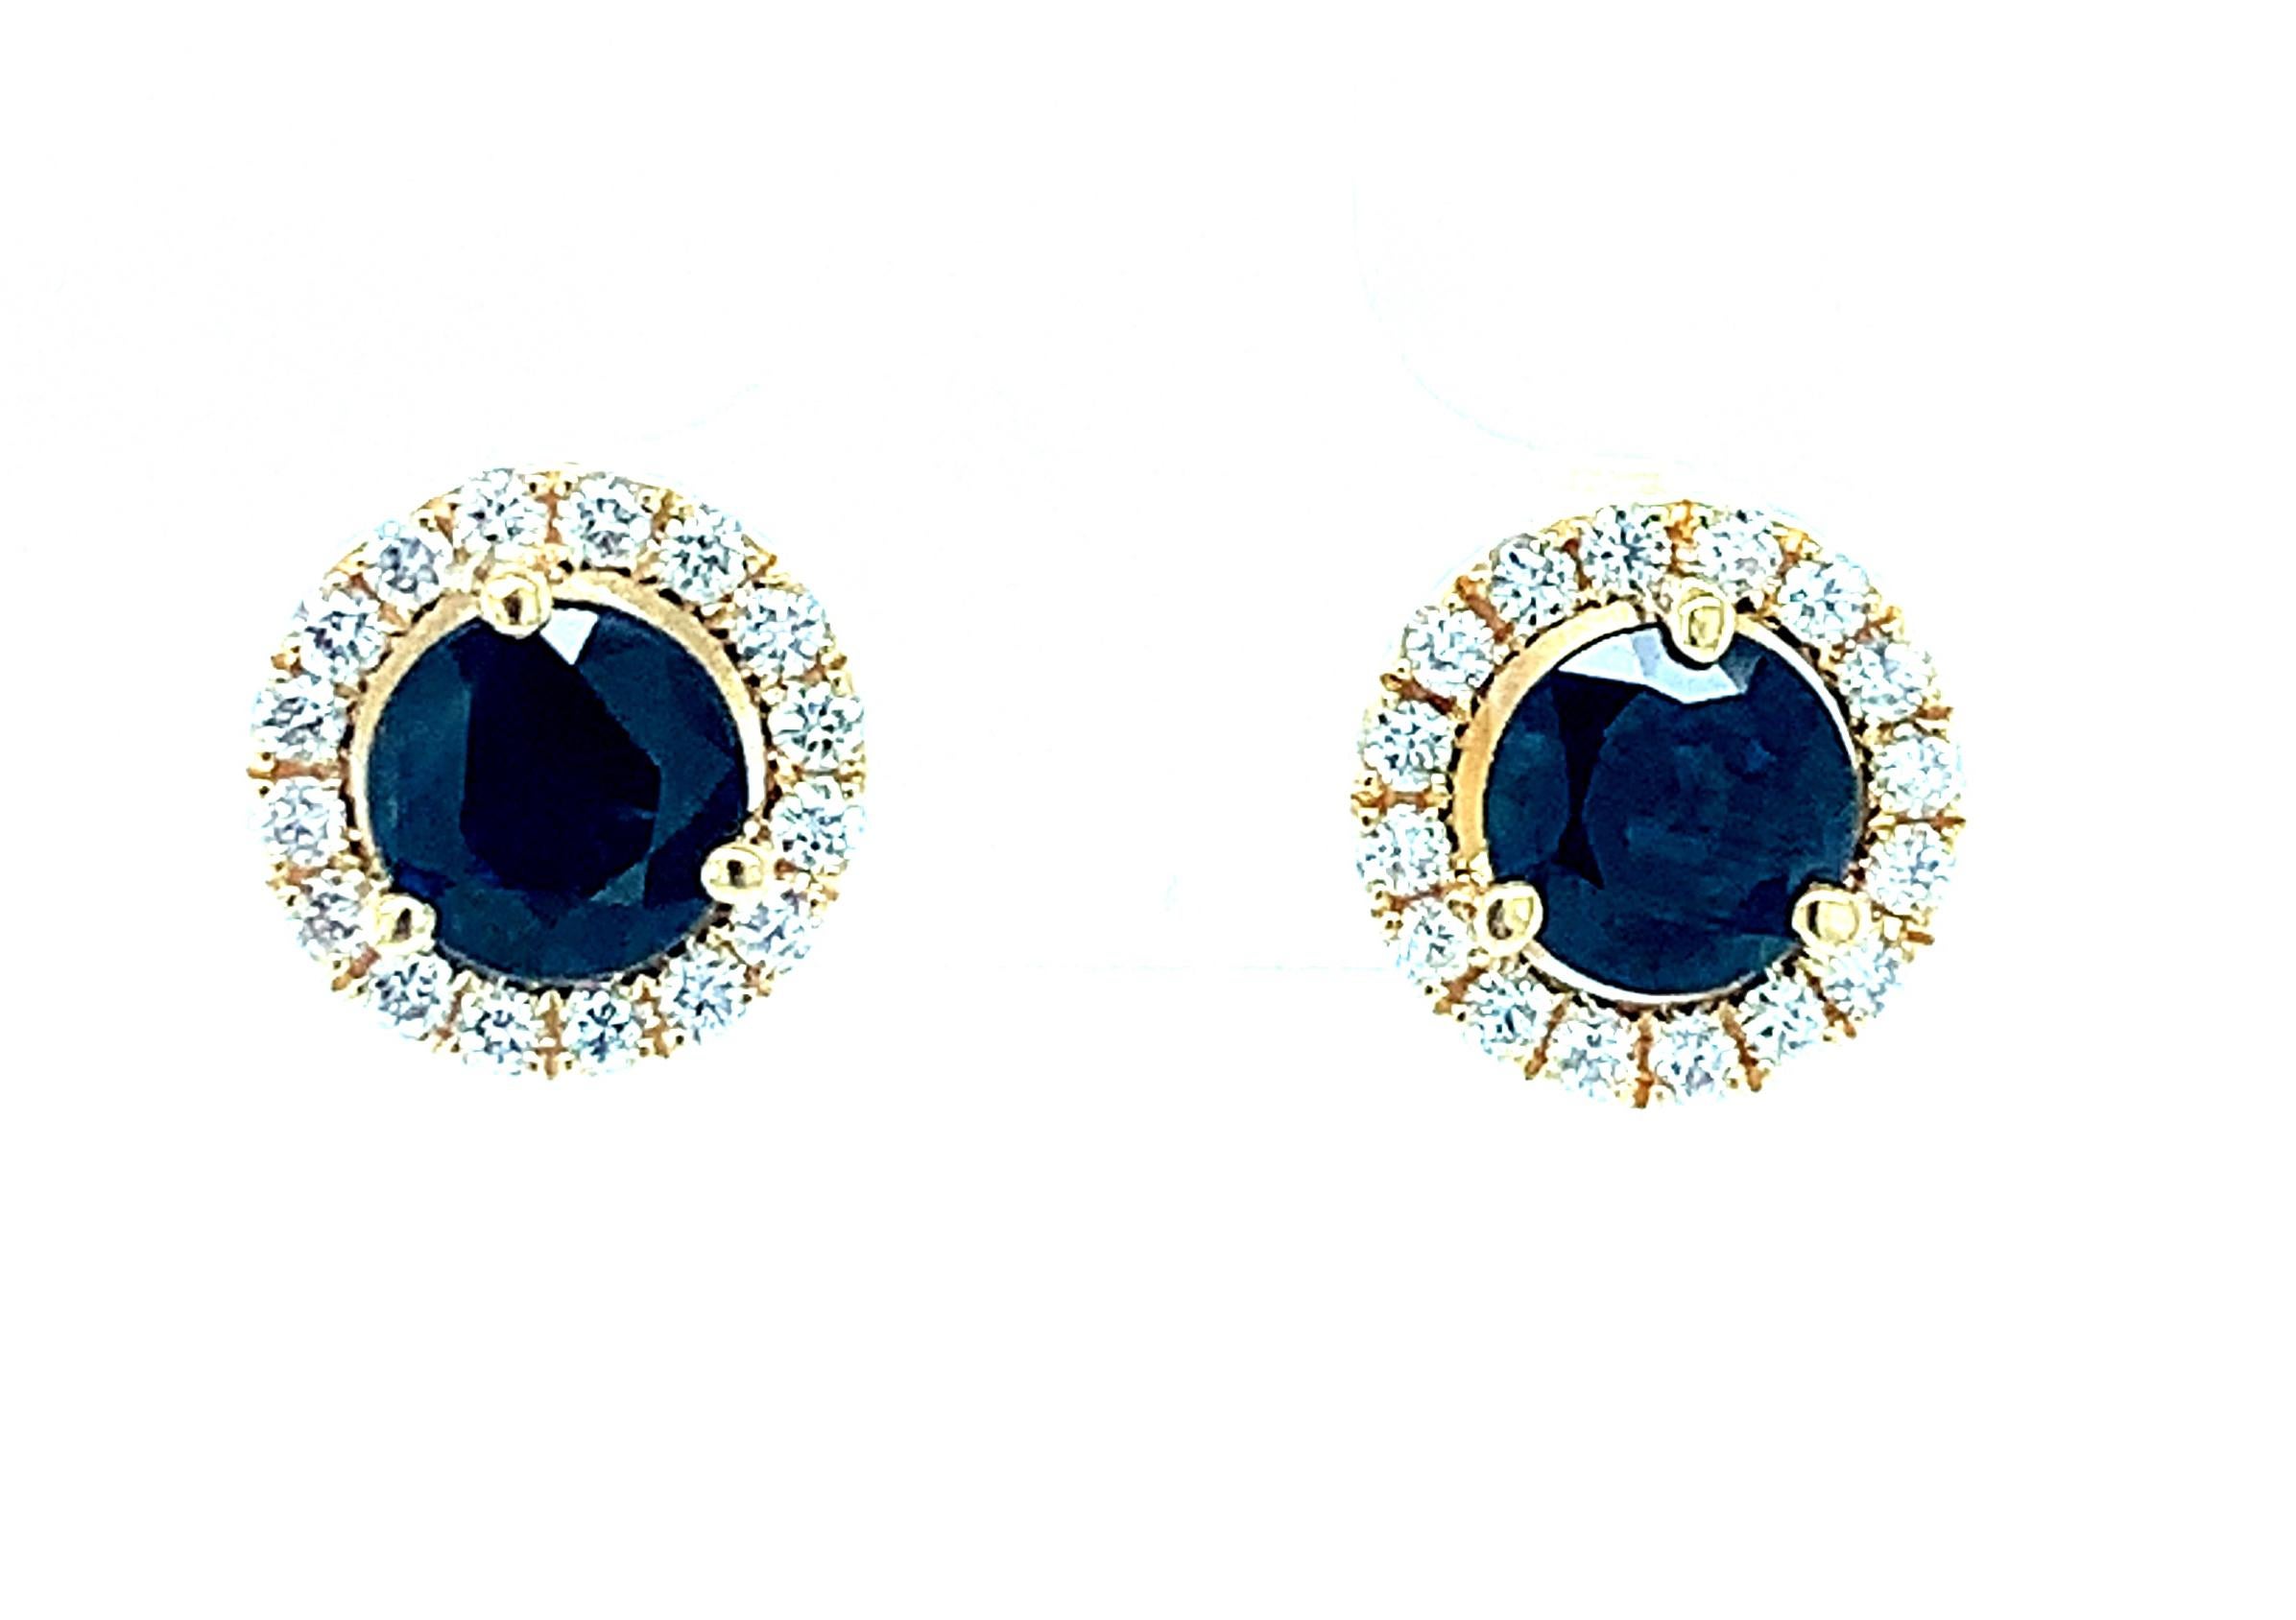 These gorgeous, deep blue sapphire studs are a must-have! Two blue sapphires are surrounded by a halo of sparkly, round brilliant cut diamonds. Handmade by our Master Jewelers in Los Angeles in 18k yellow gold. The perfect addition to any fine